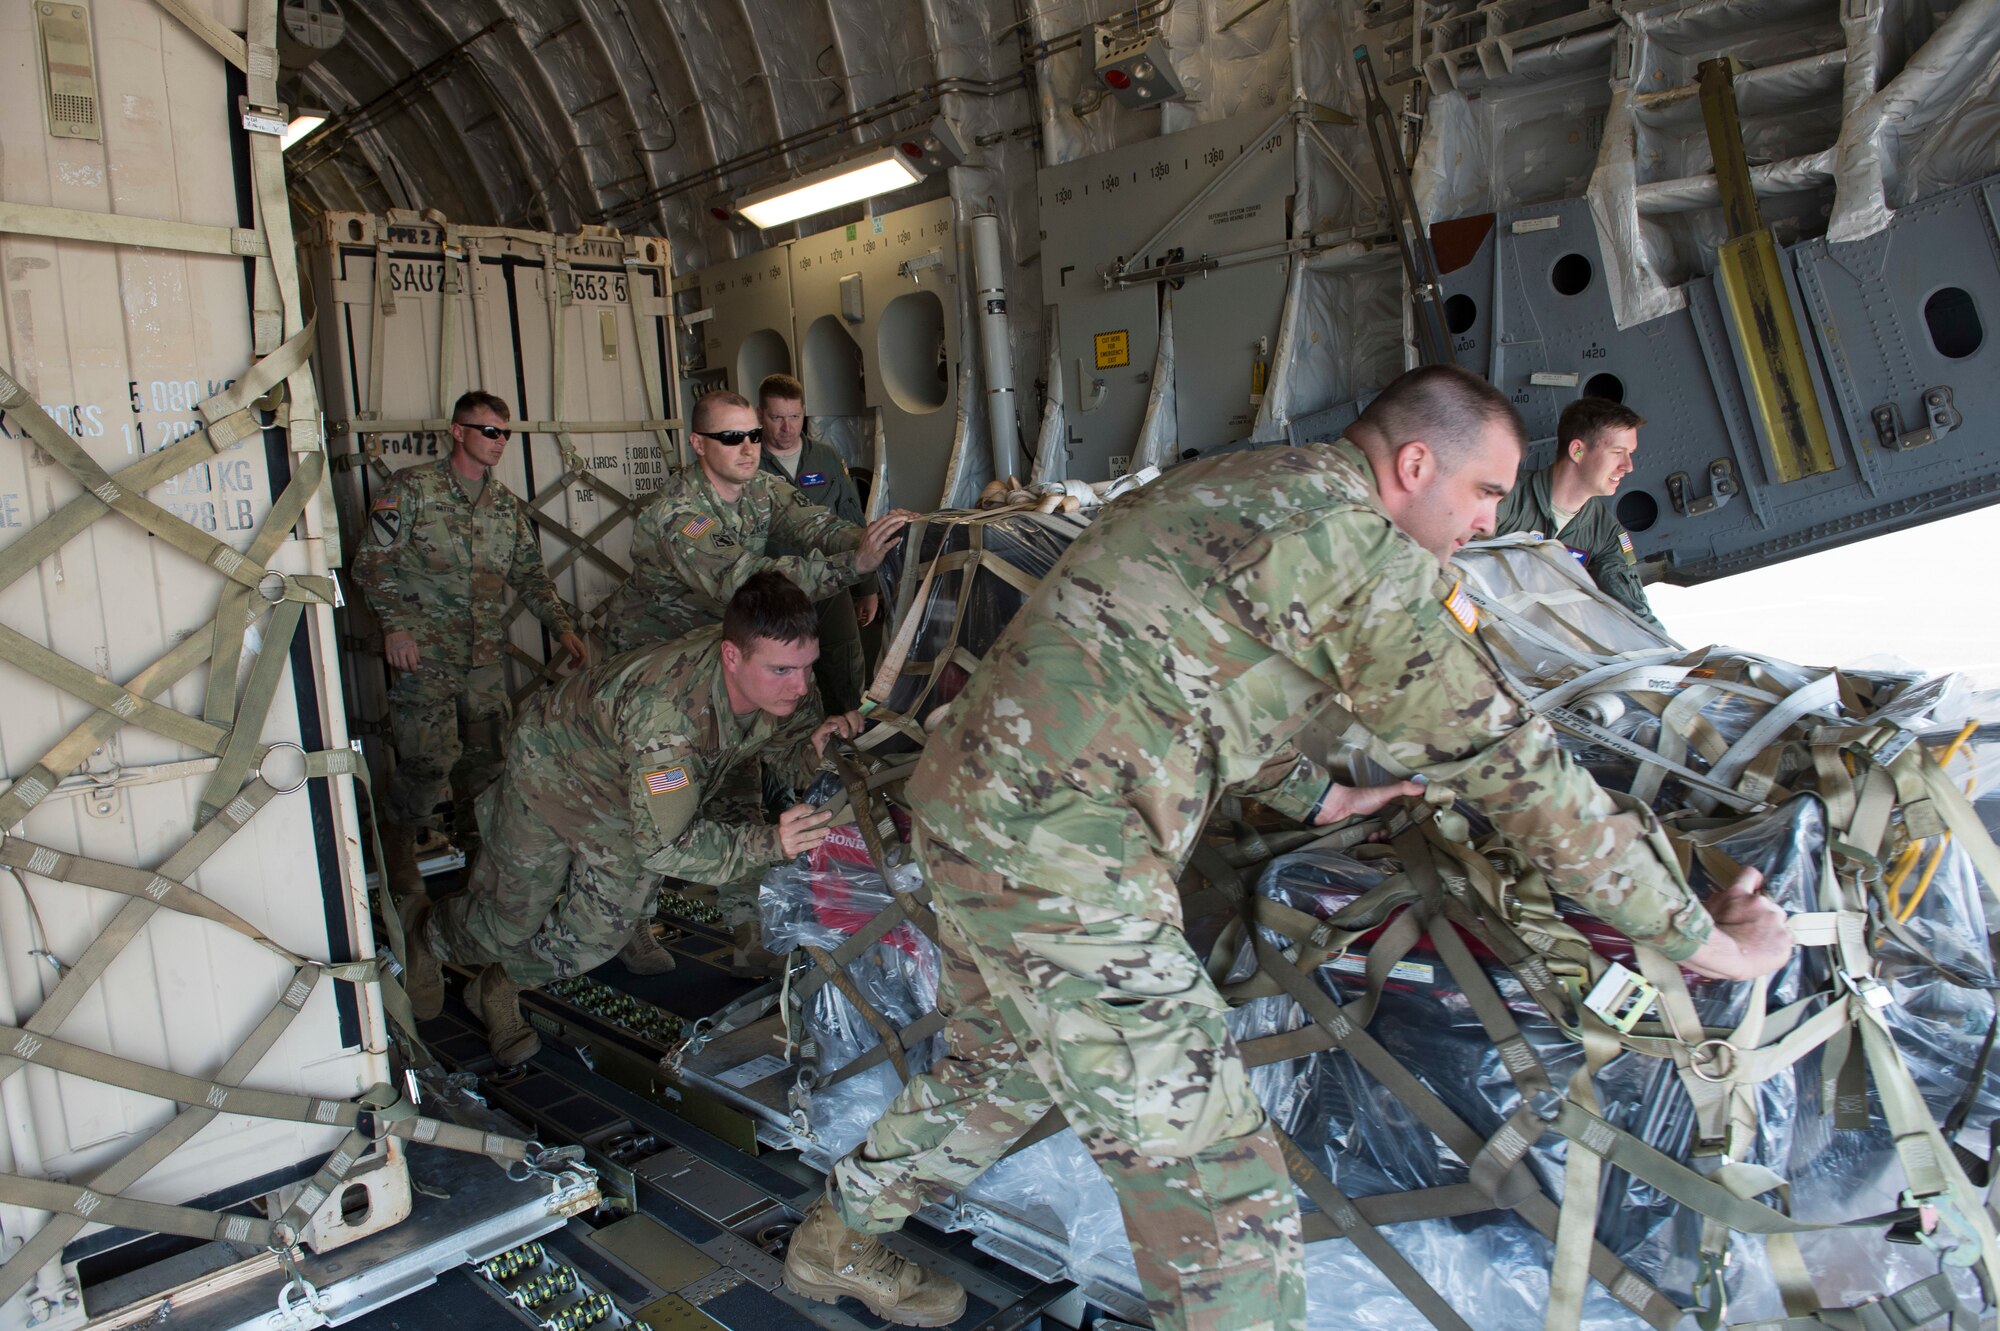 Army Soldiers from the 555th Engineer Brigade and Air Force Airmen from the 4th Airlift Squadron work together to unload a pallet of equipment from a C-17 Globemaster III, May 21, 2018, at Moses Lake, Wash. The Soldiers were moving vehicles and equipment from Joint Base Lewis-McChord to Moses Lake part of a rapid deployment exercise. (U.S. Air Force photo by A1C Sara Hoerichs)